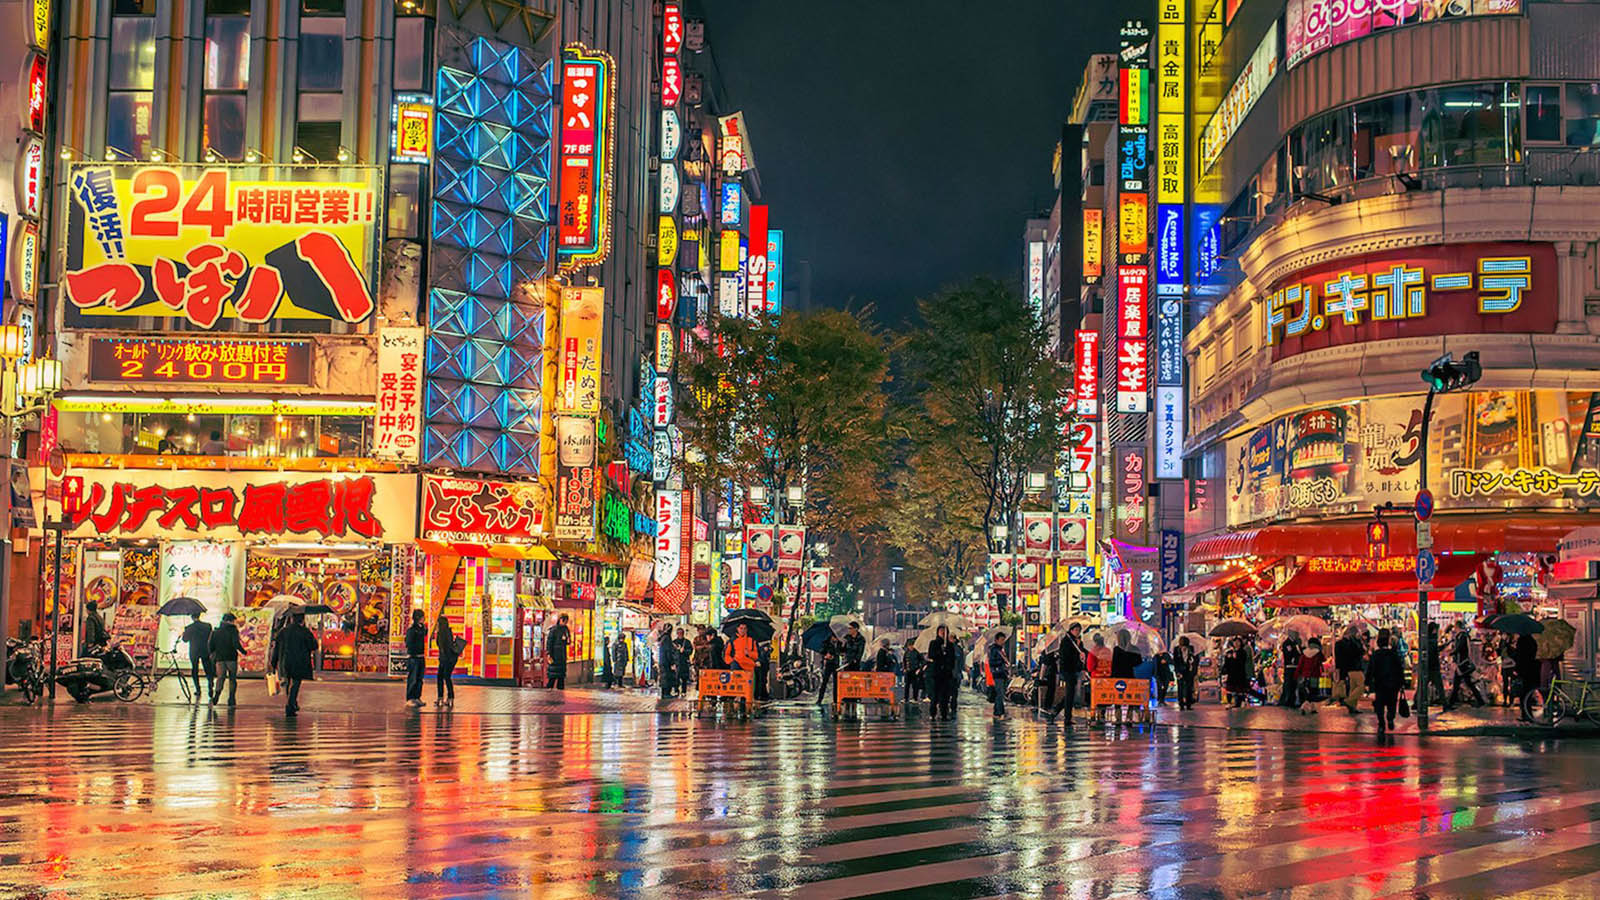 It’s That Easy — Get More Than 17/25 on This Geography Test to Win Tokyo, Japan